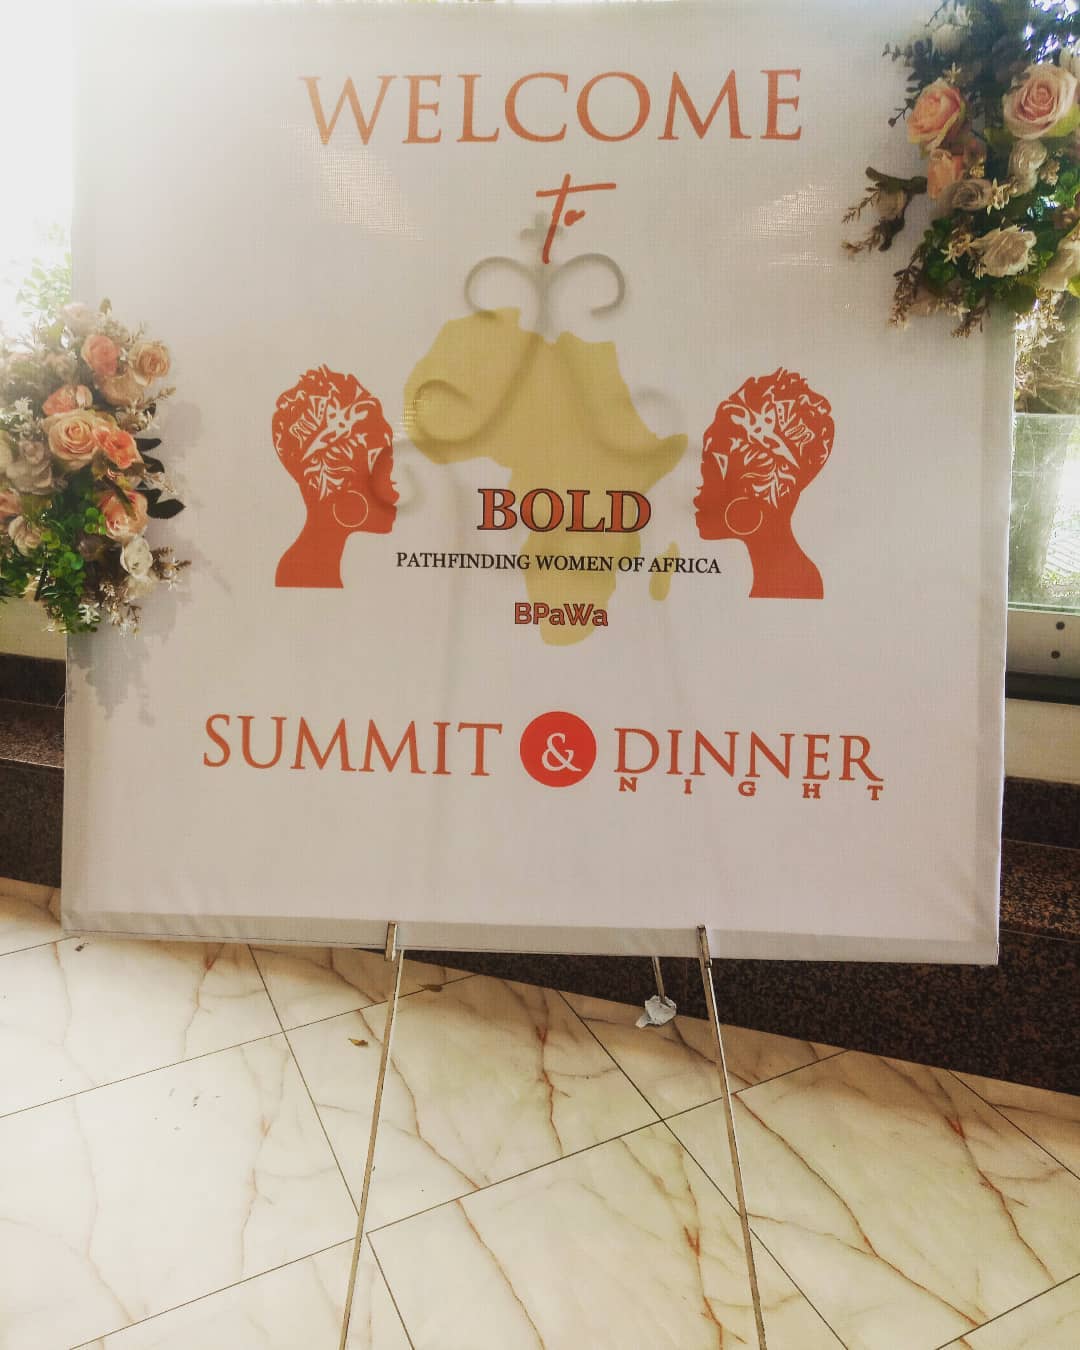 253539045 1146651372407347 5942848510774058322 n - Welcome to the ideal women summit. First of its kind for African women, in African.

BPaWa, Empoweri...